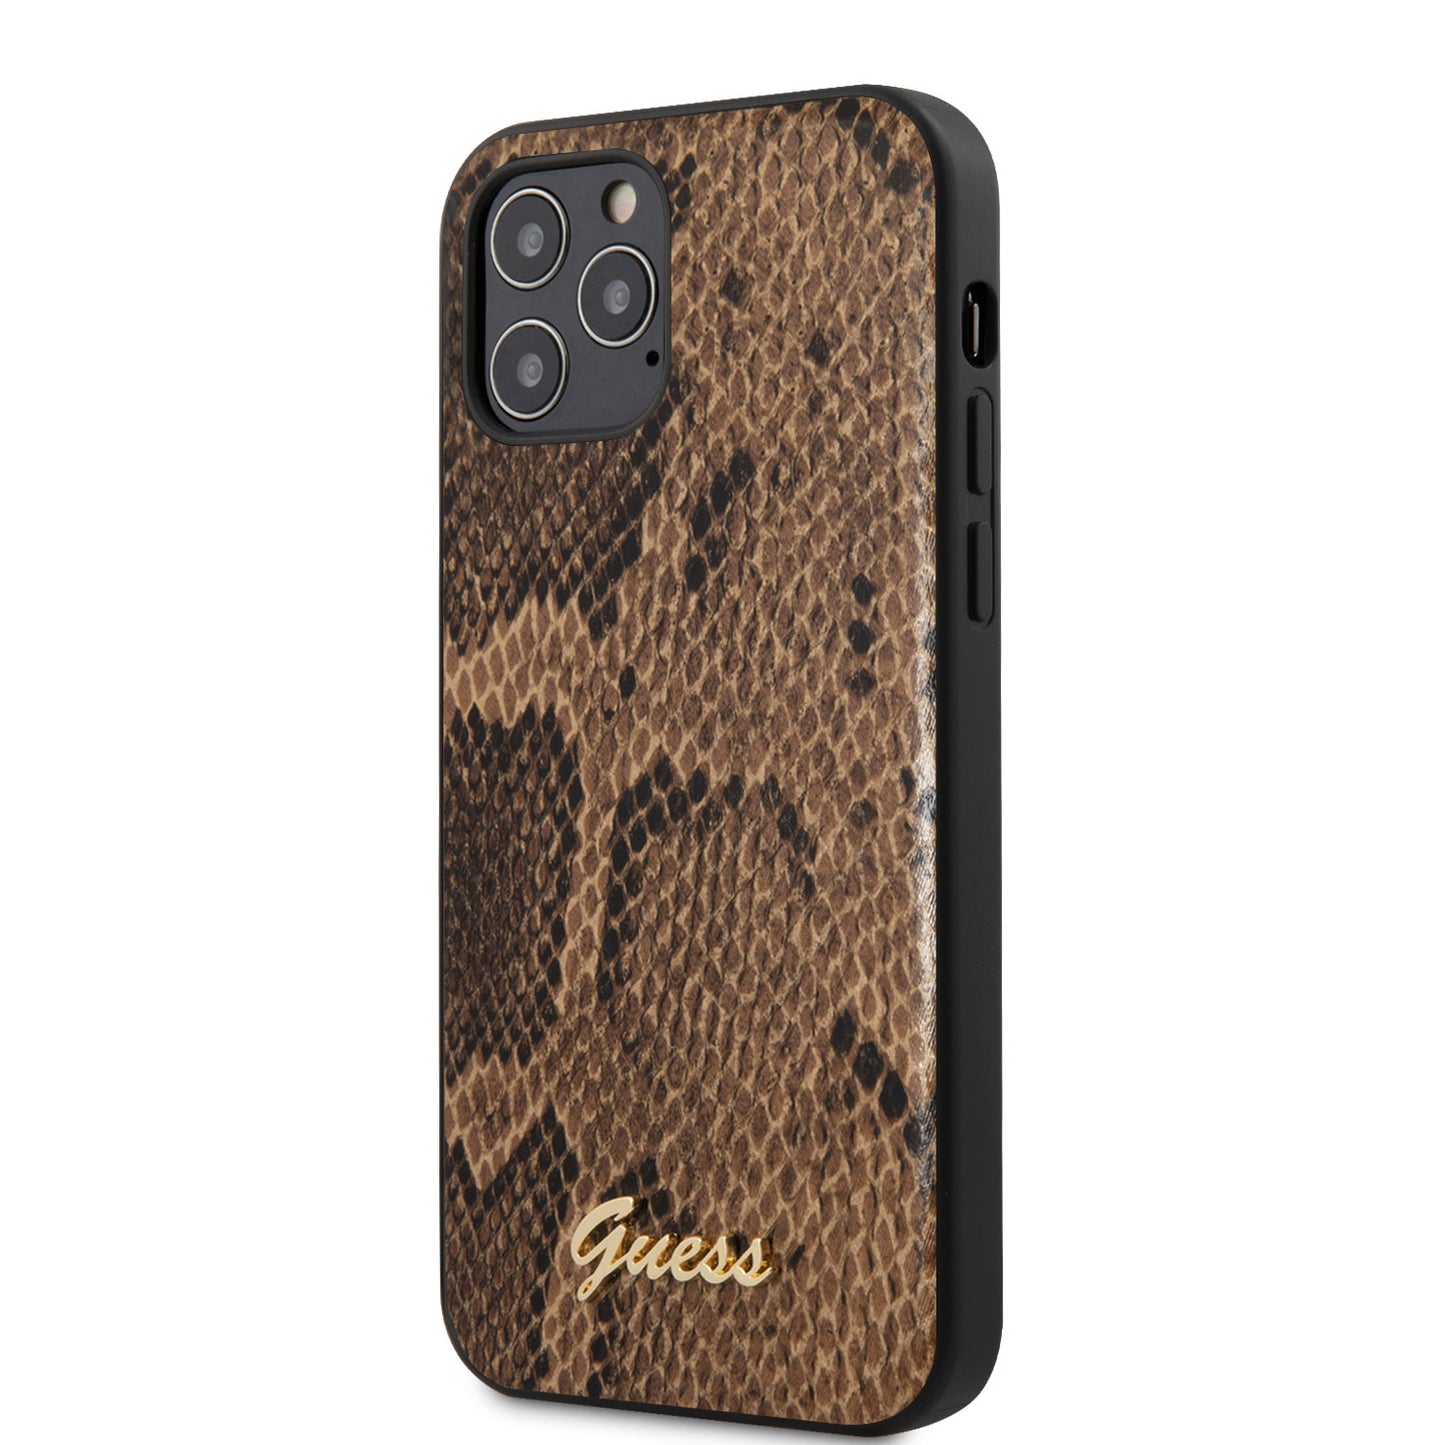 Guess iPhone 12/12 PRO Backcover - Python - Bruin